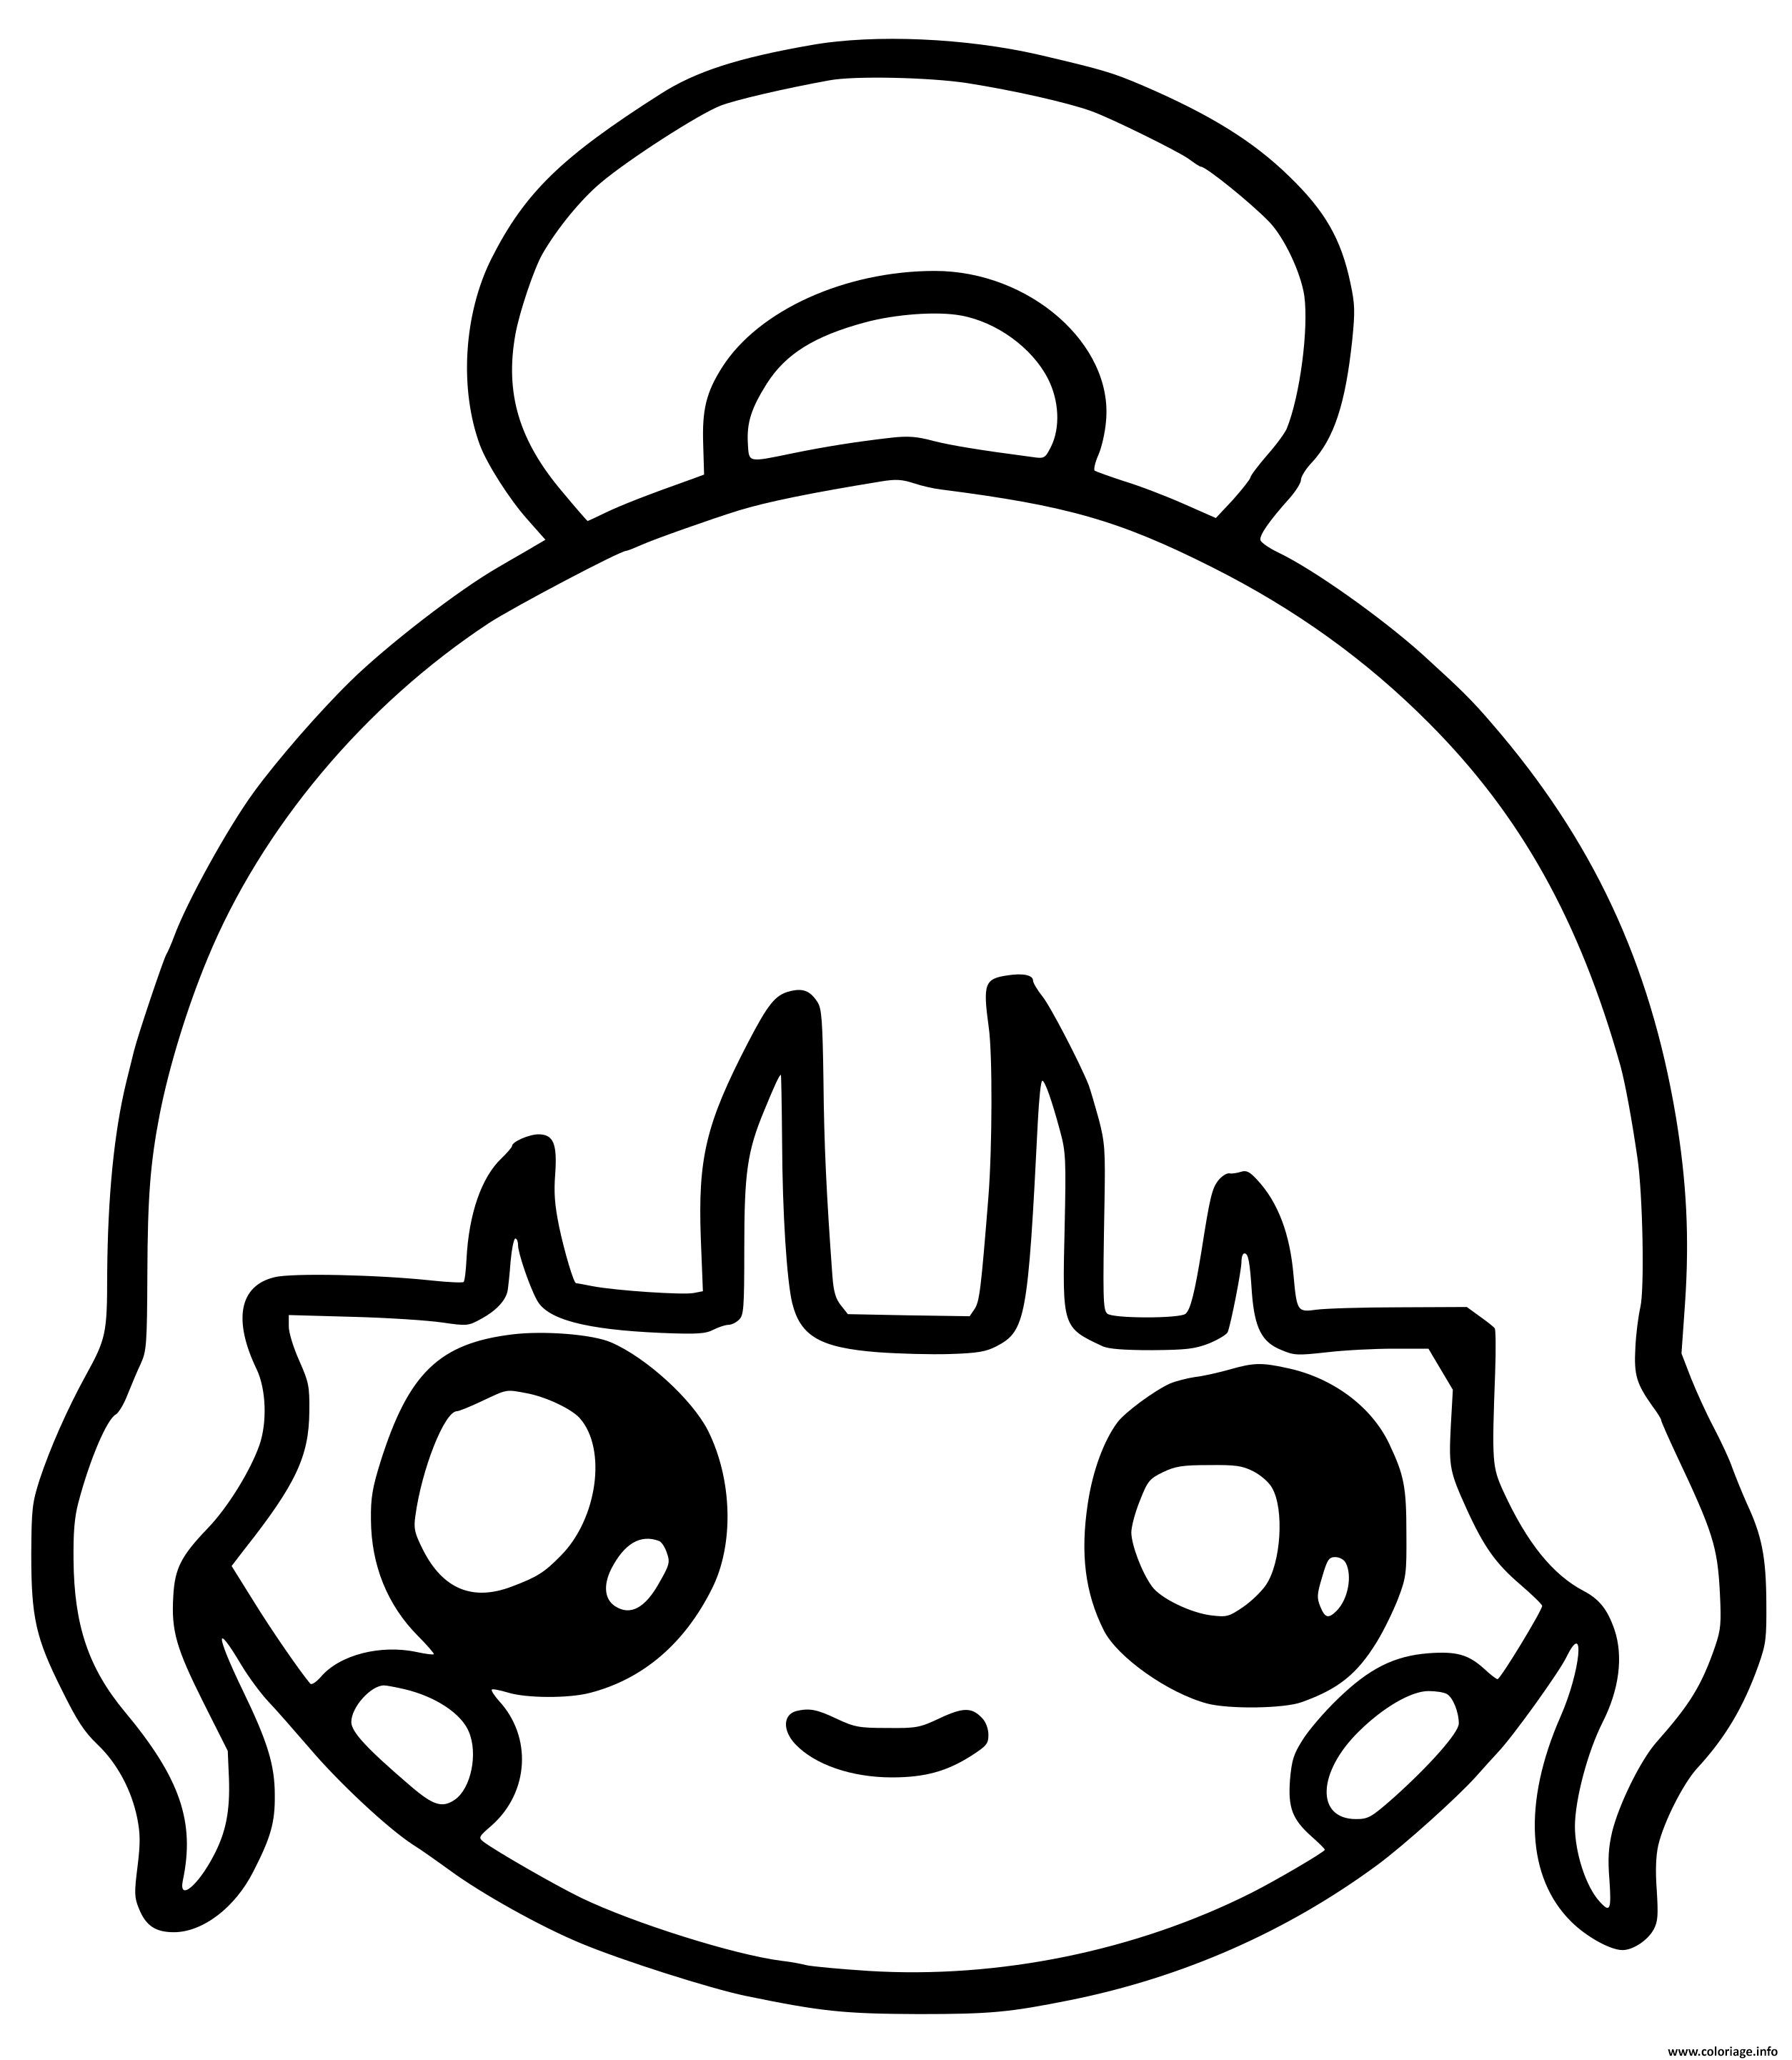 https://coloriage.info/images/ccovers/1591299786fille-kawaii.jpg